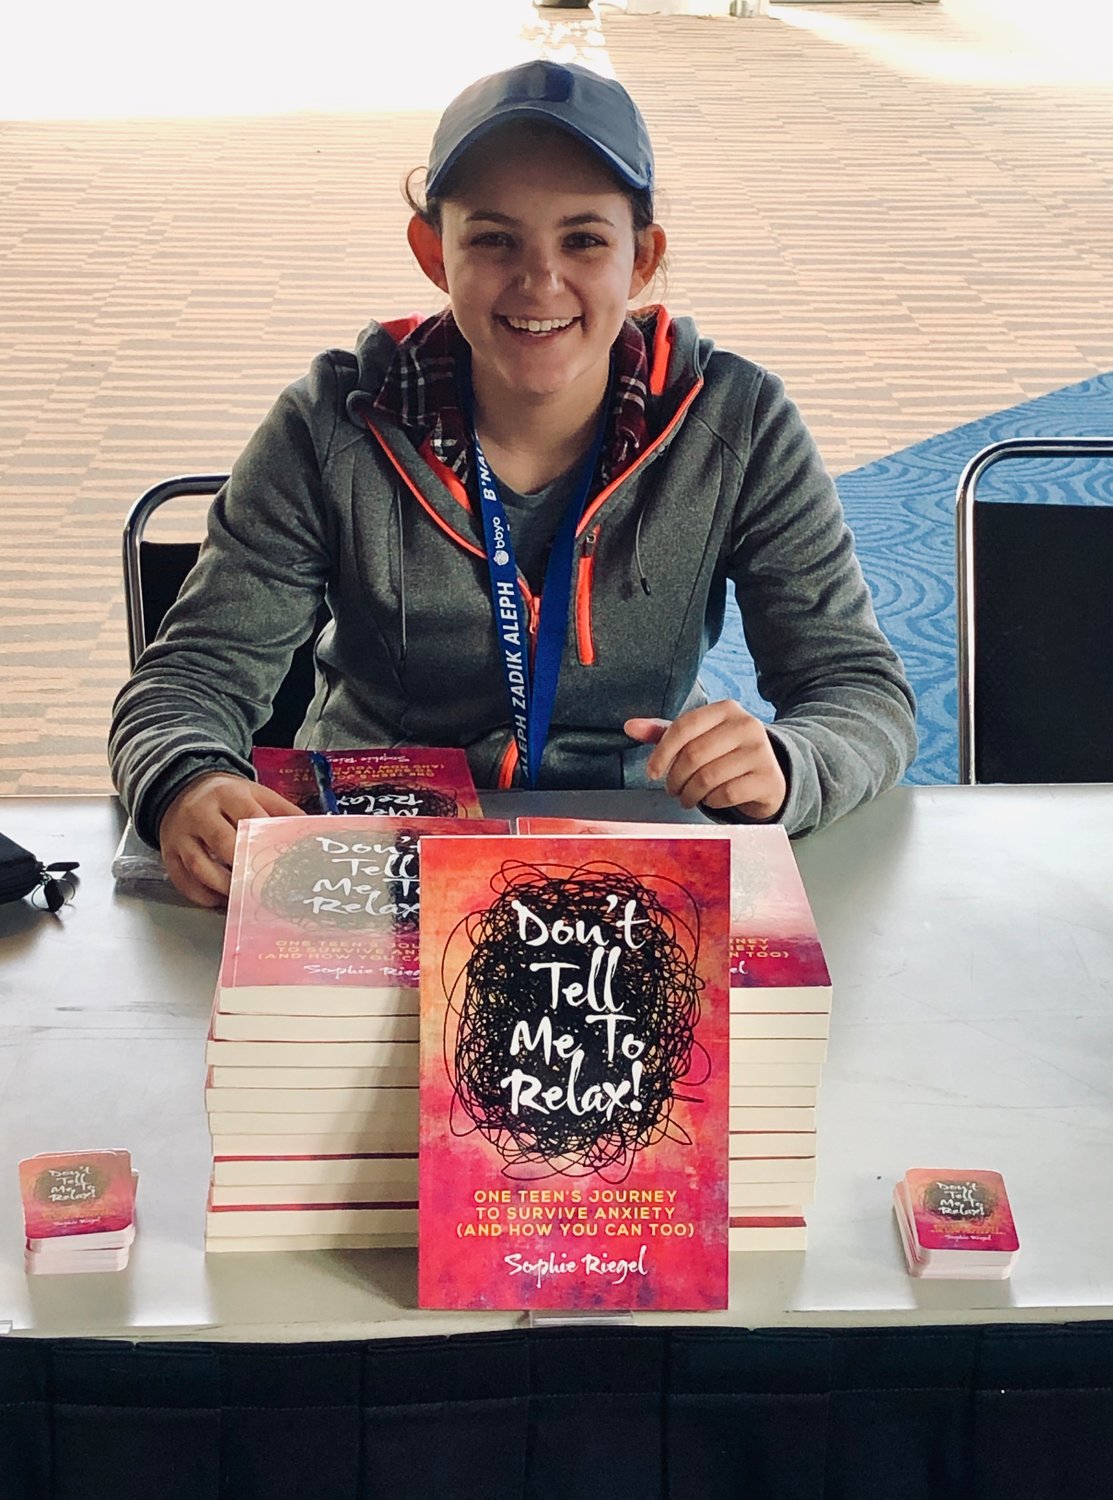 Hewlett High School senior Sophie Riegel signed copies of her book ‘Don’t Tell Me To Relax,’ at the BBYO event in February.